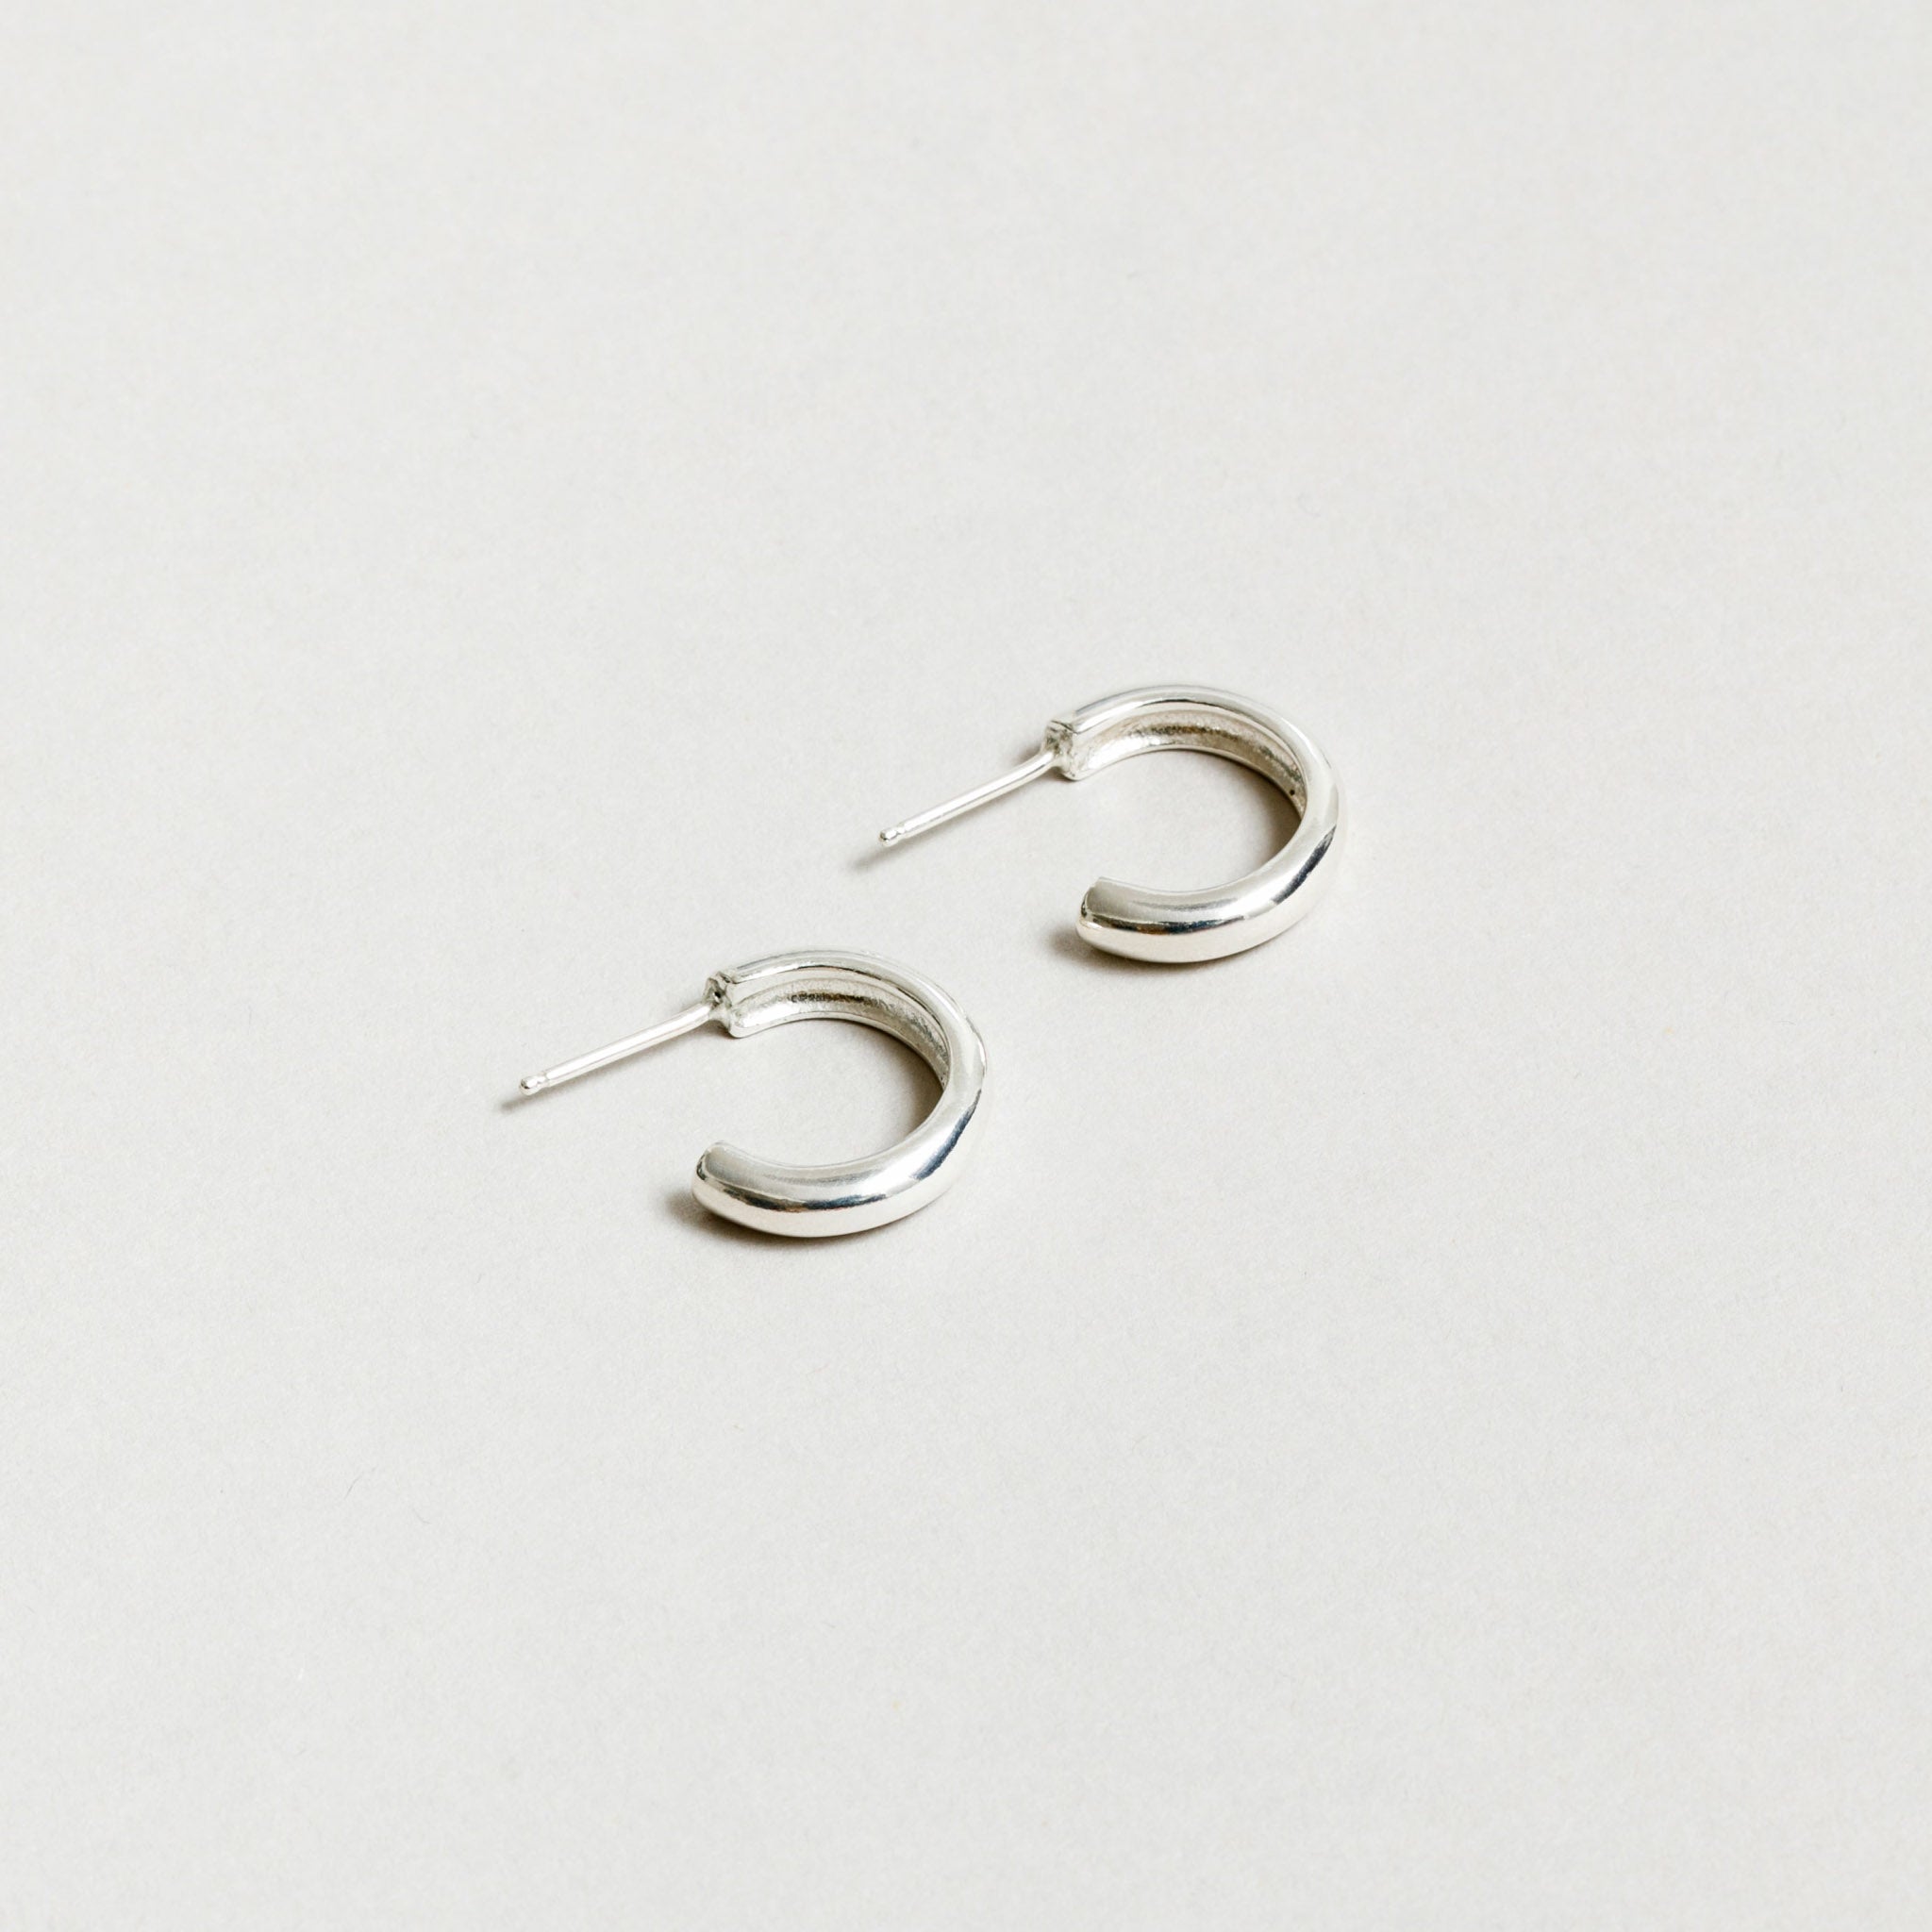 Small sterling silver hoop earrings rest against a white background. 